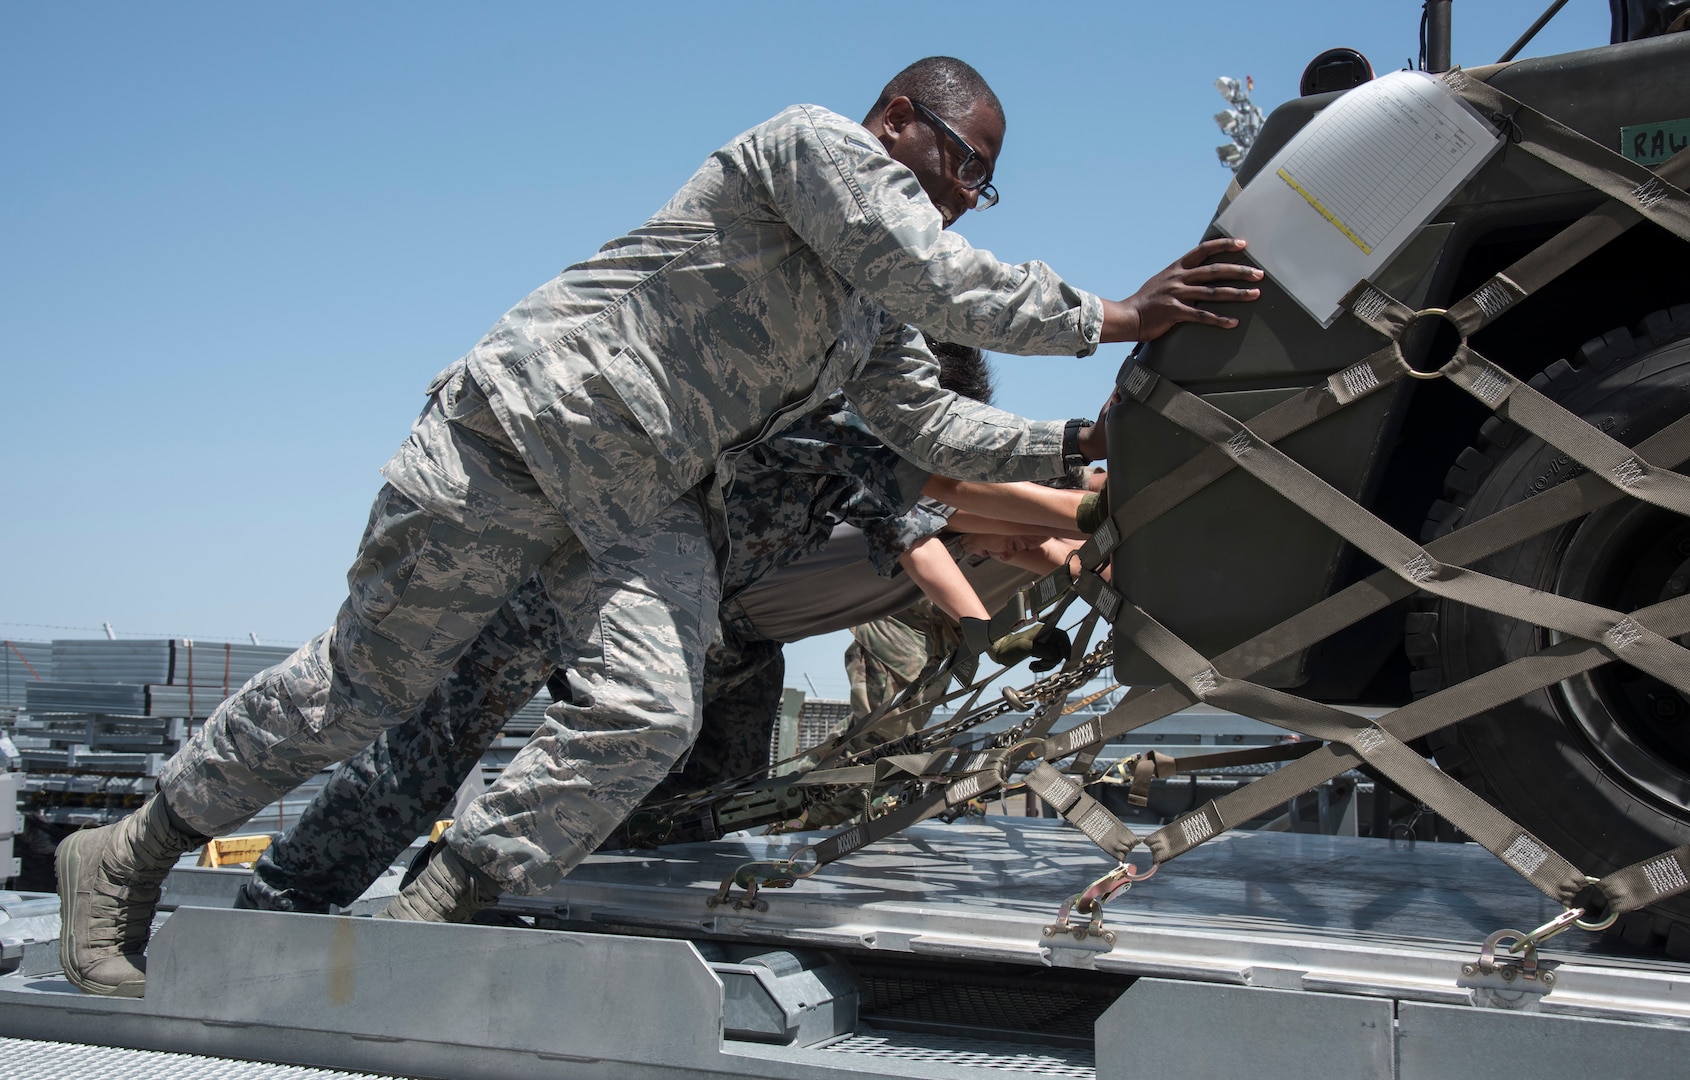 U.S. Air Force and Japan Air Self-Defense Force personnel push a supply pallet together into a loading truck at Misawa Air Base, Japan, May 25, 2019. The supply pallets included both U.S. Air Force and JASDF supplies for exercise RED FLAG-Alaska 19-2 exercise. (U.S. Air Force photo by Branden Yamada)